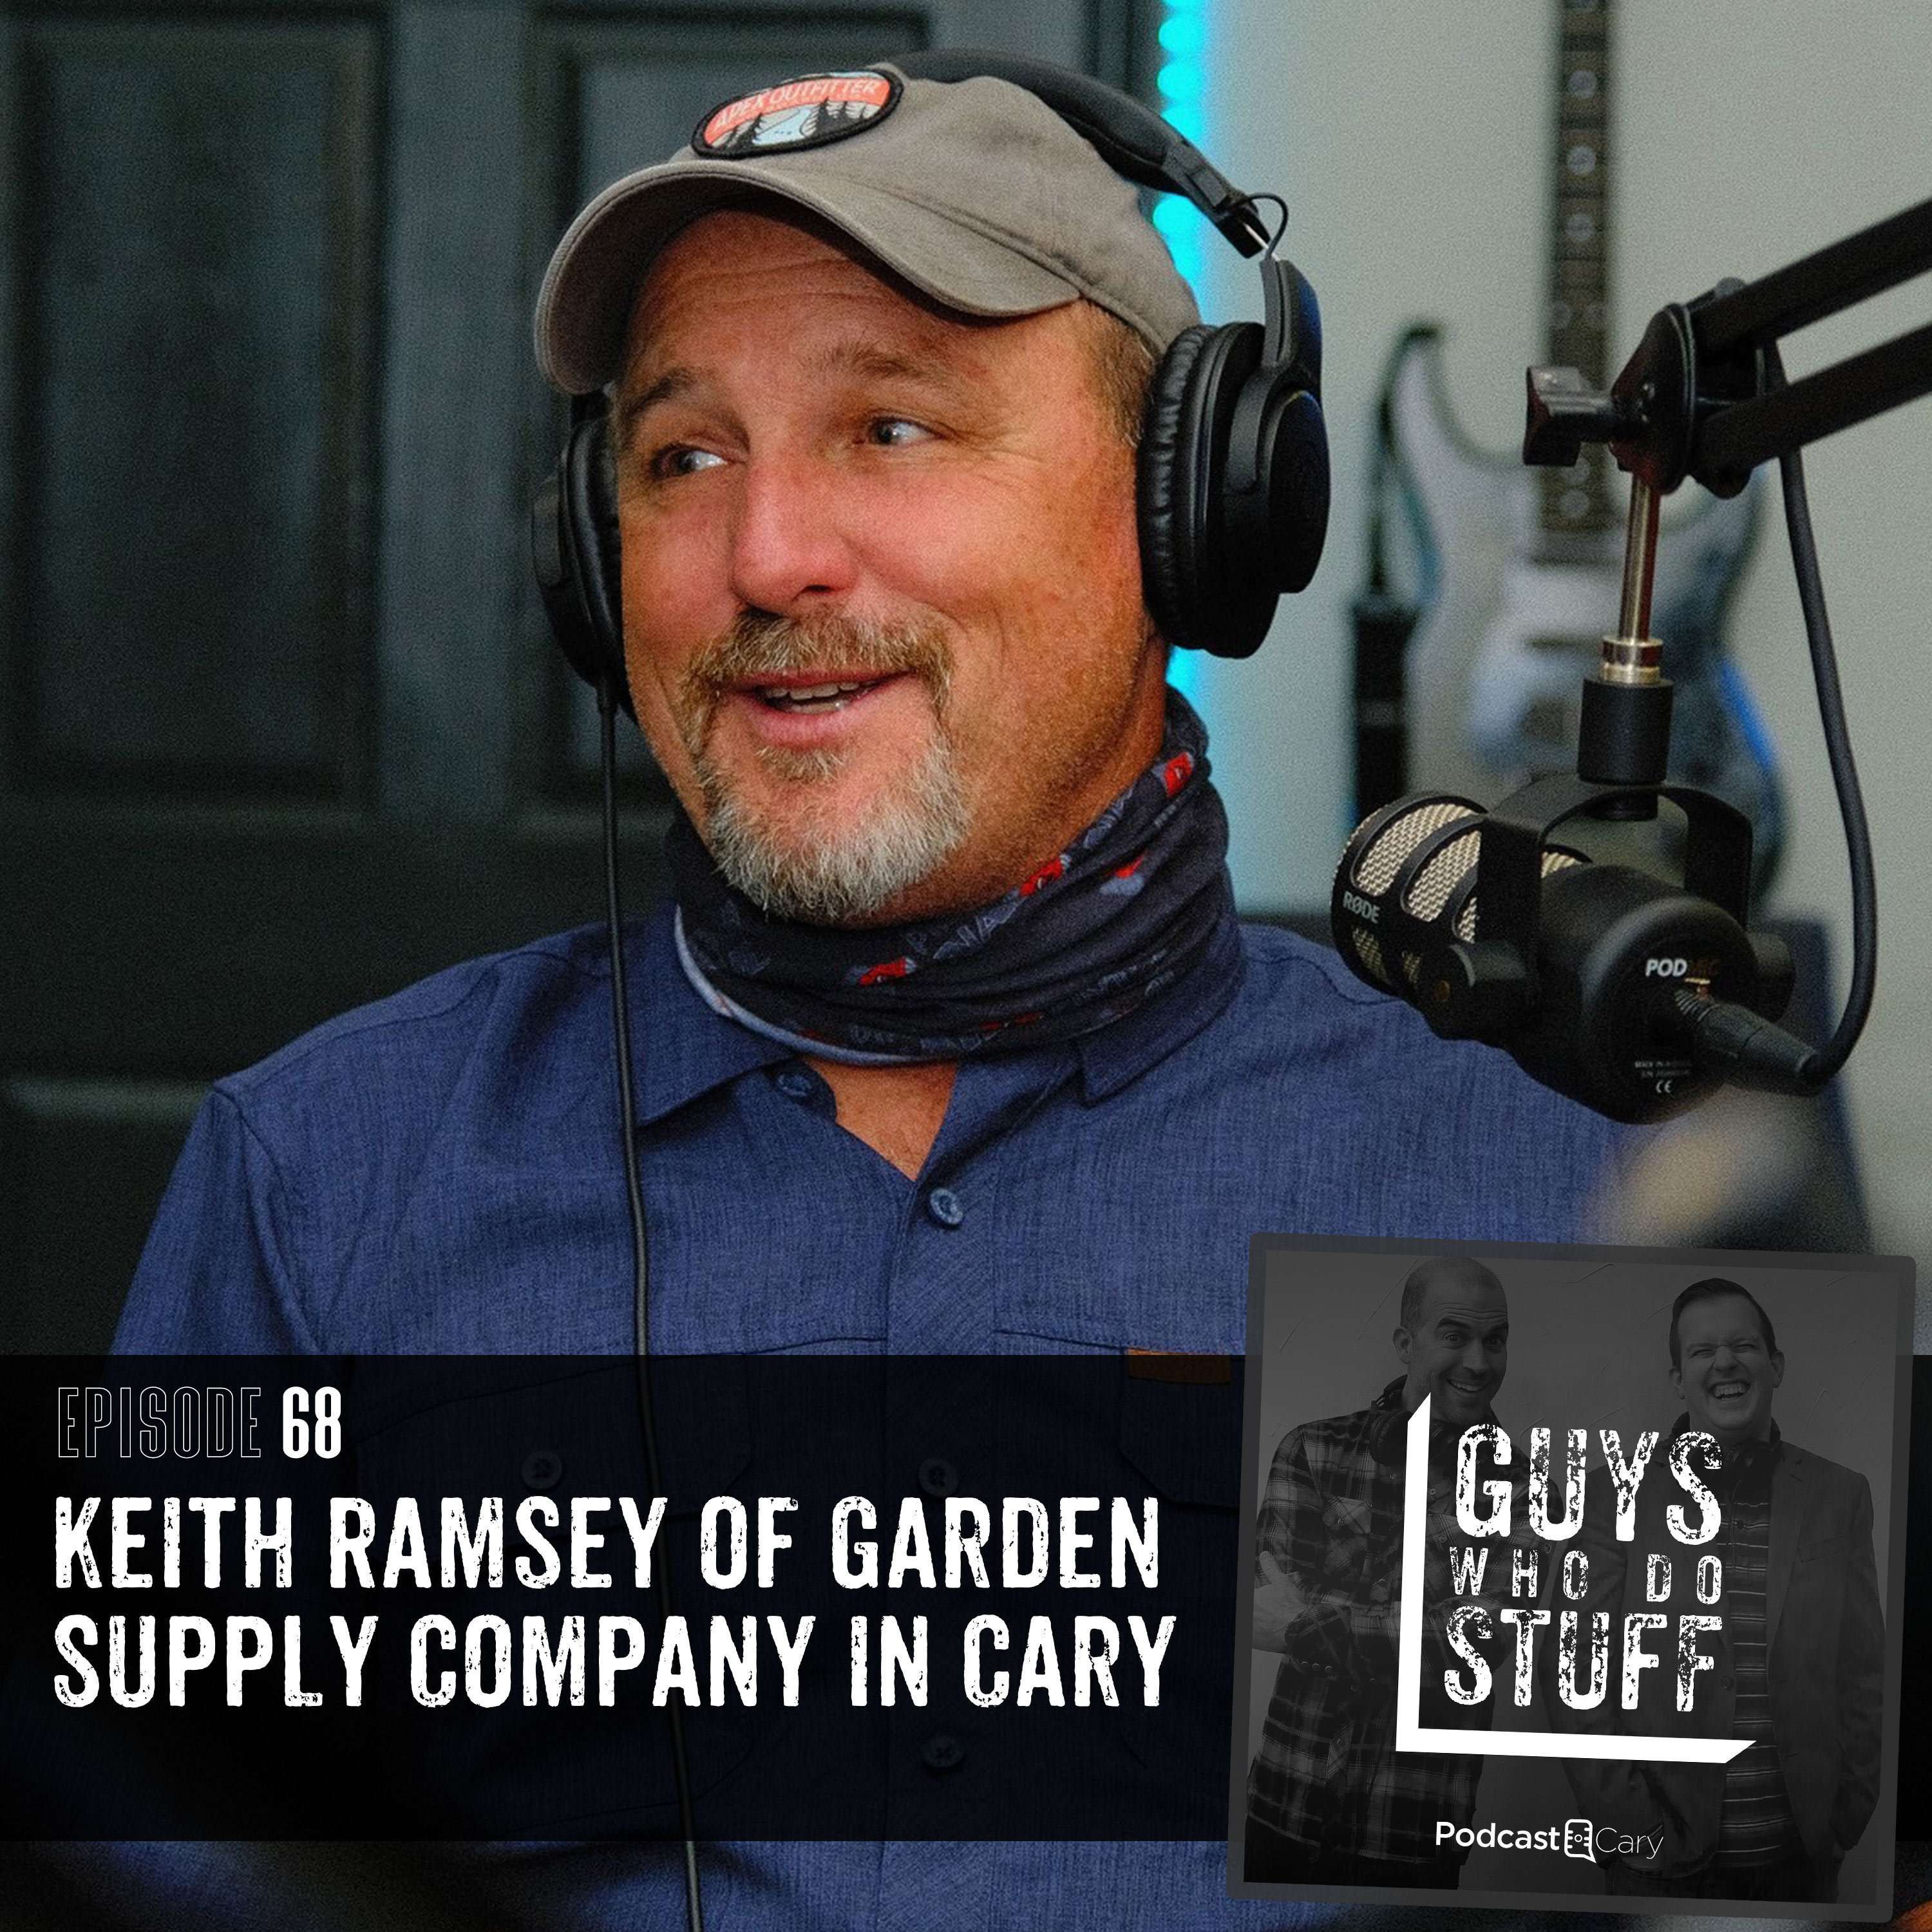 Keith Ramsey of Garden Supply Company in Cary